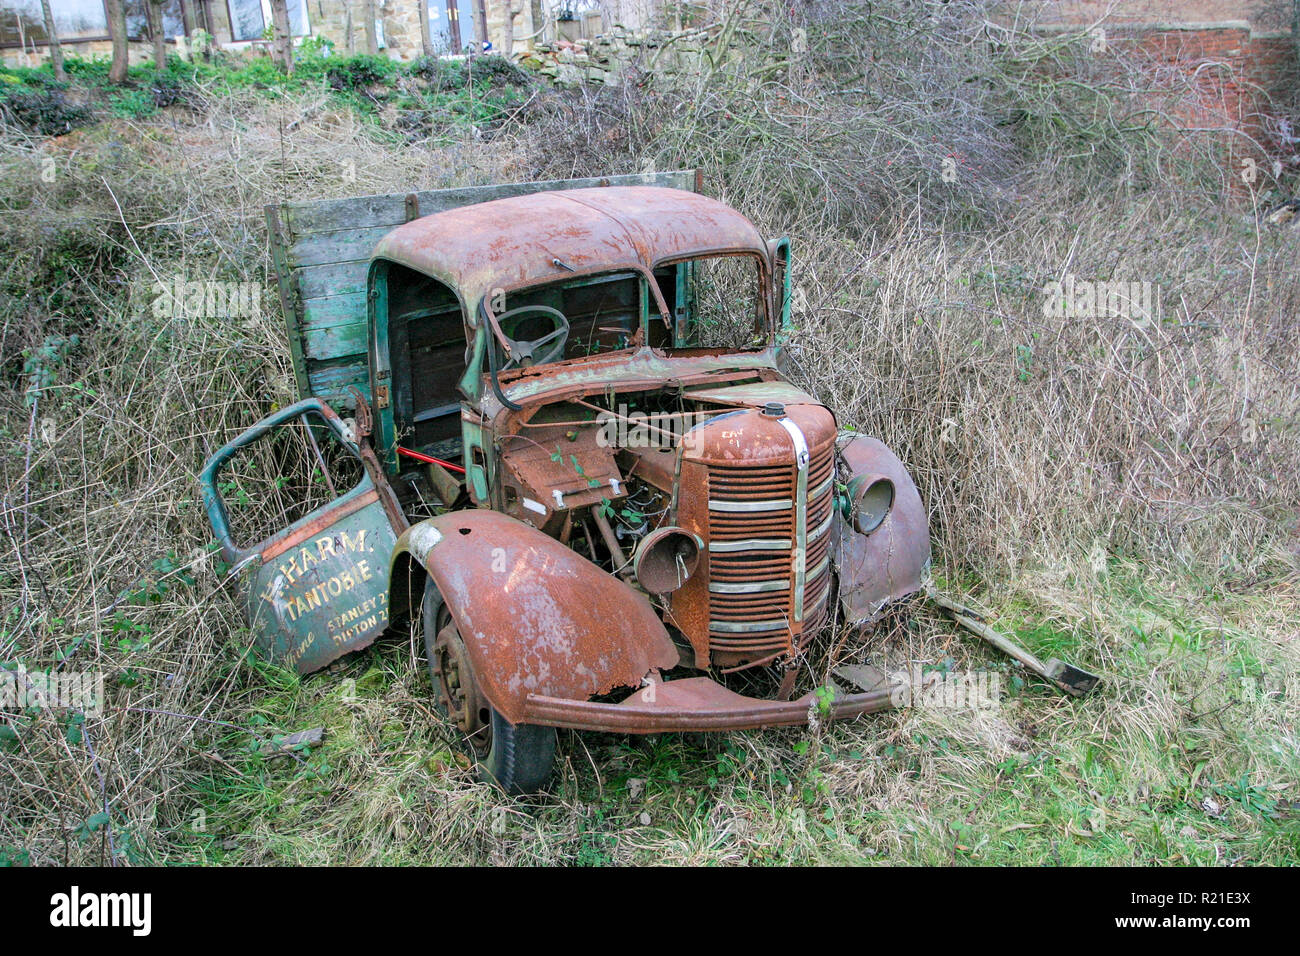 Abandoned old derelict and rusty 1940's Bedford M Series or O Series truck on waste ground surrounded by weeds and grass, County Durham UK Stock Photo